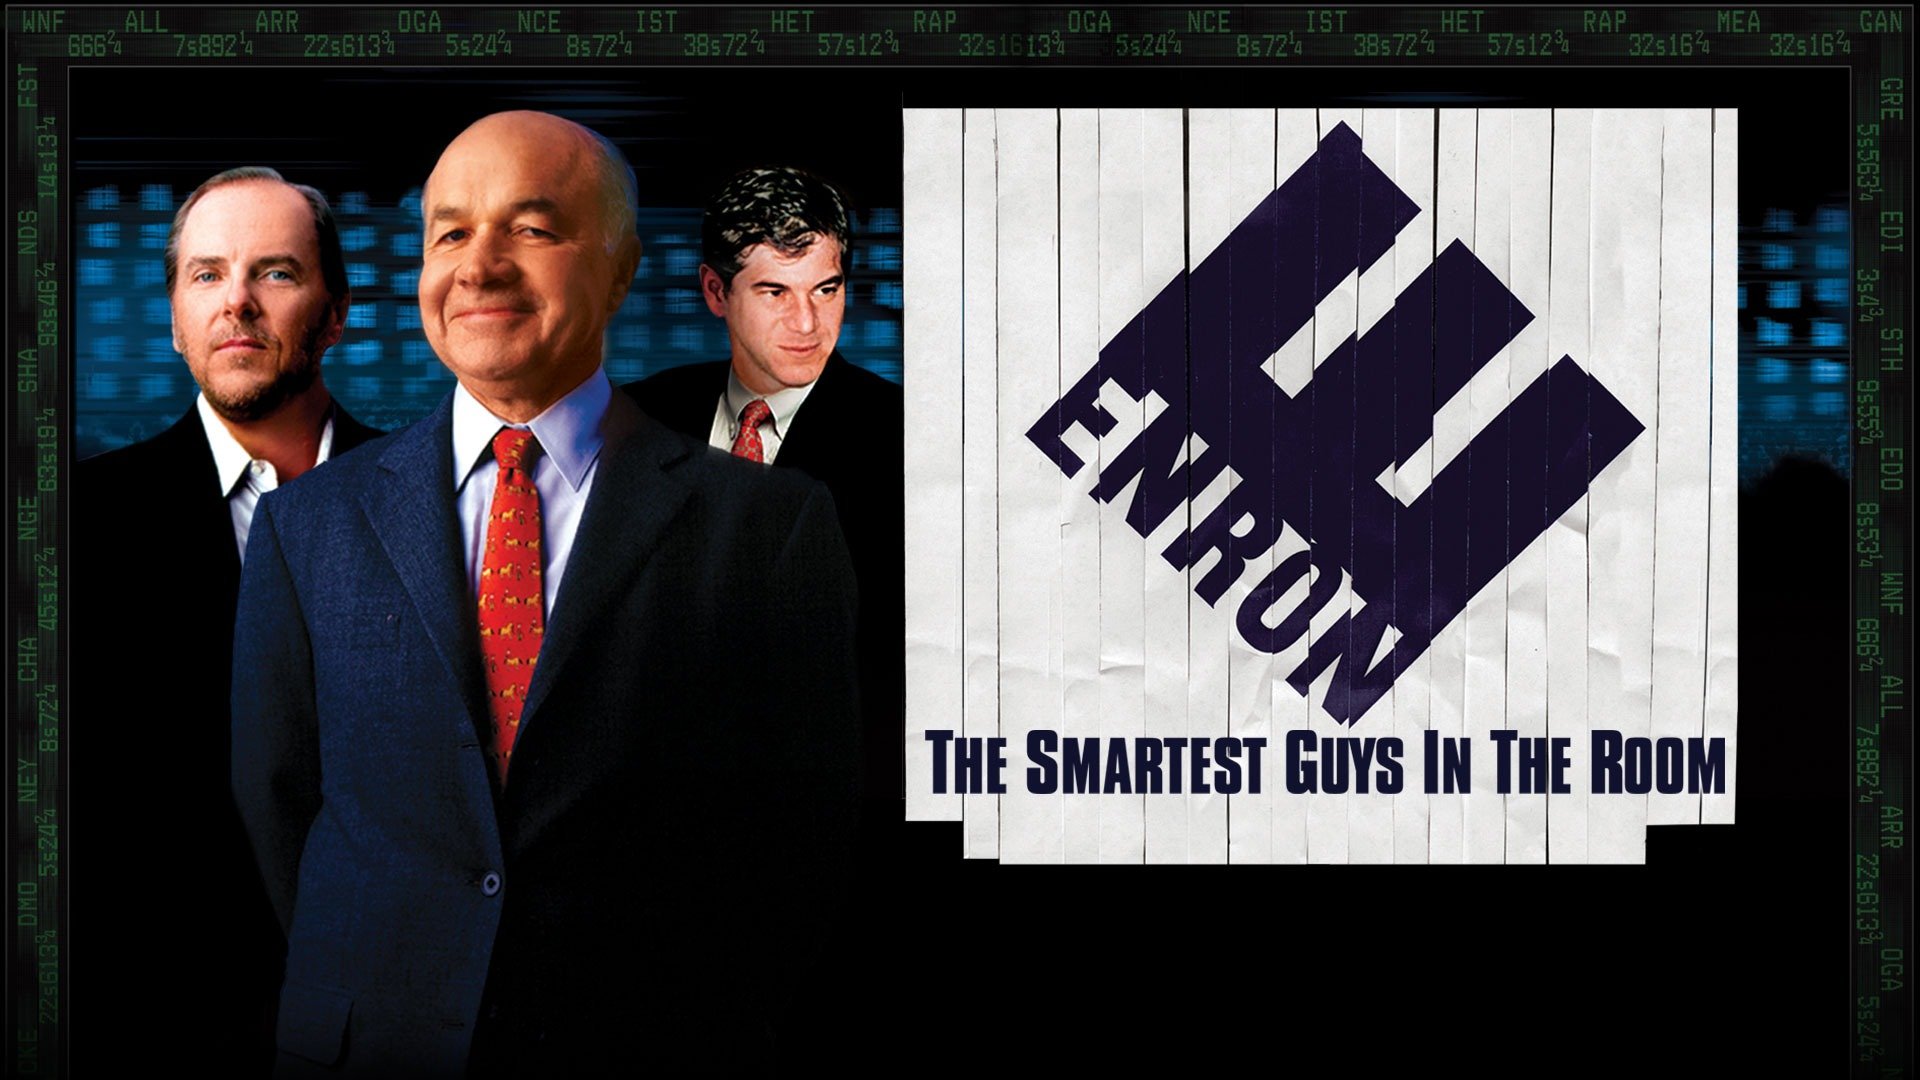 41-facts-about-the-movie-enron-the-smartest-guys-in-the-room